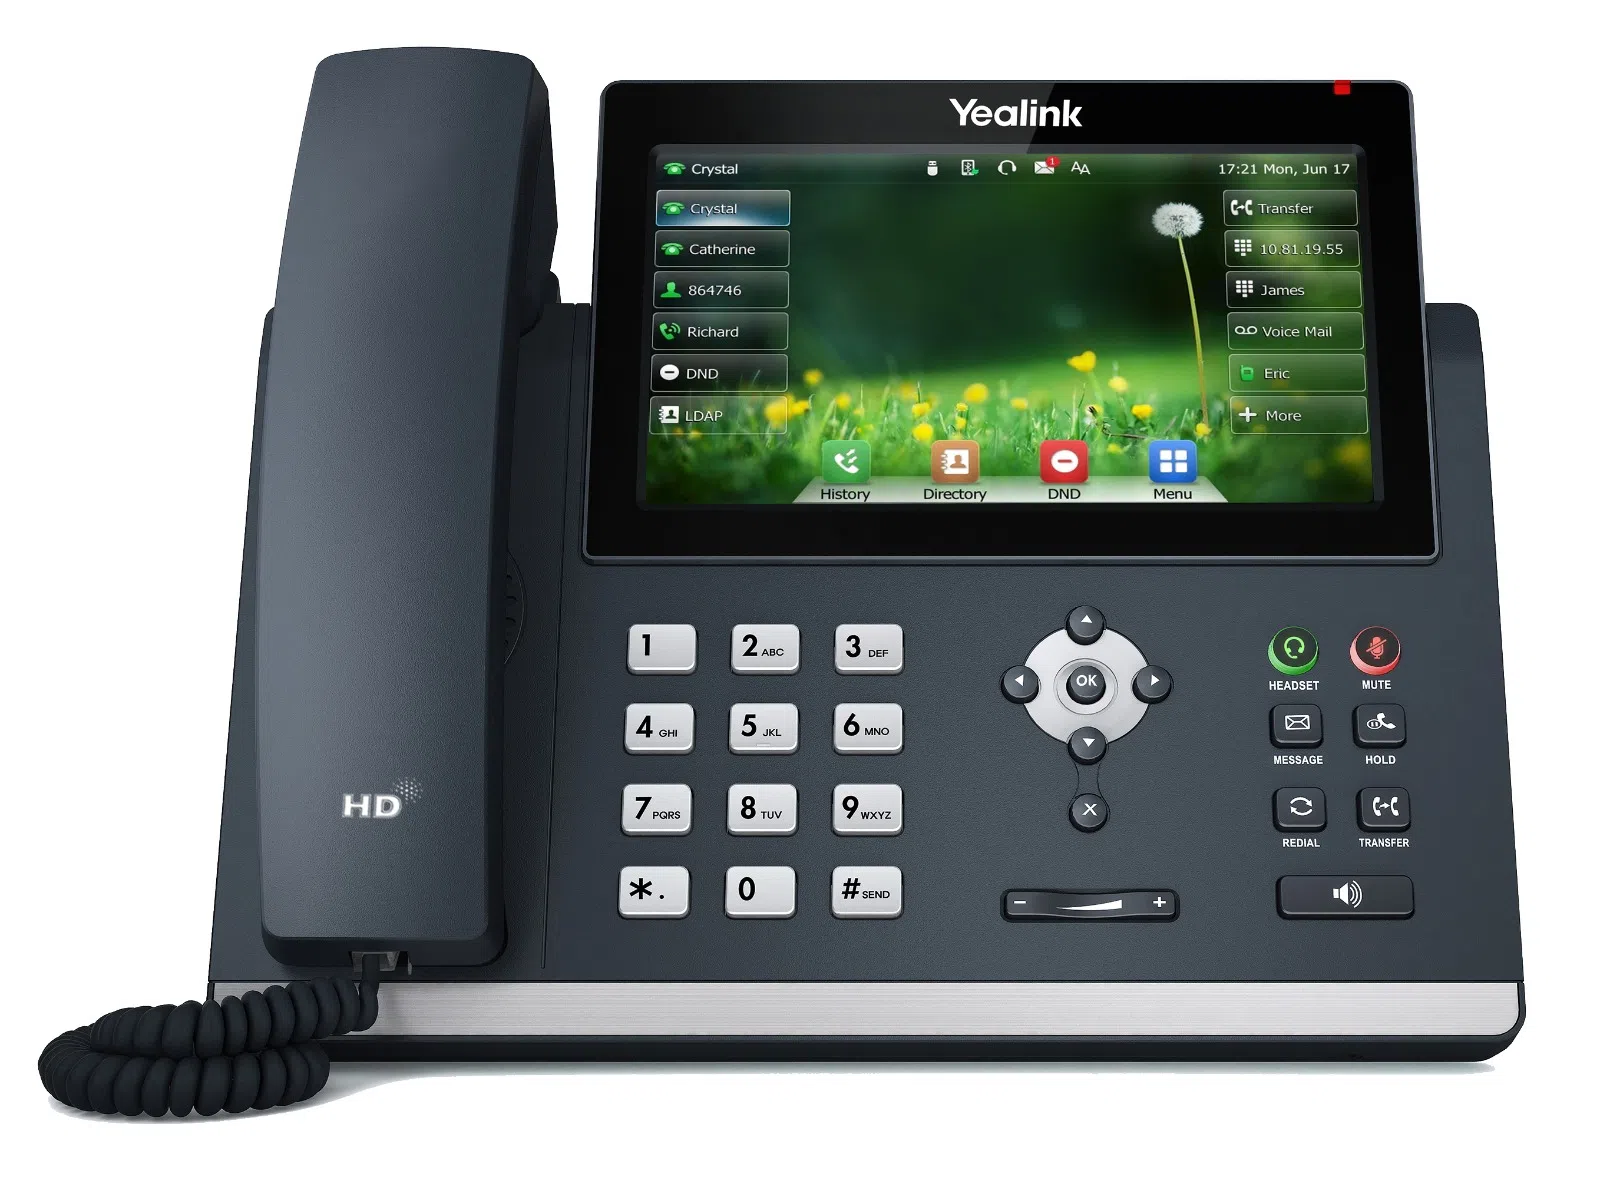 What functions does the Yealink T48U Touchscreen IP Phone 1301204 provide?